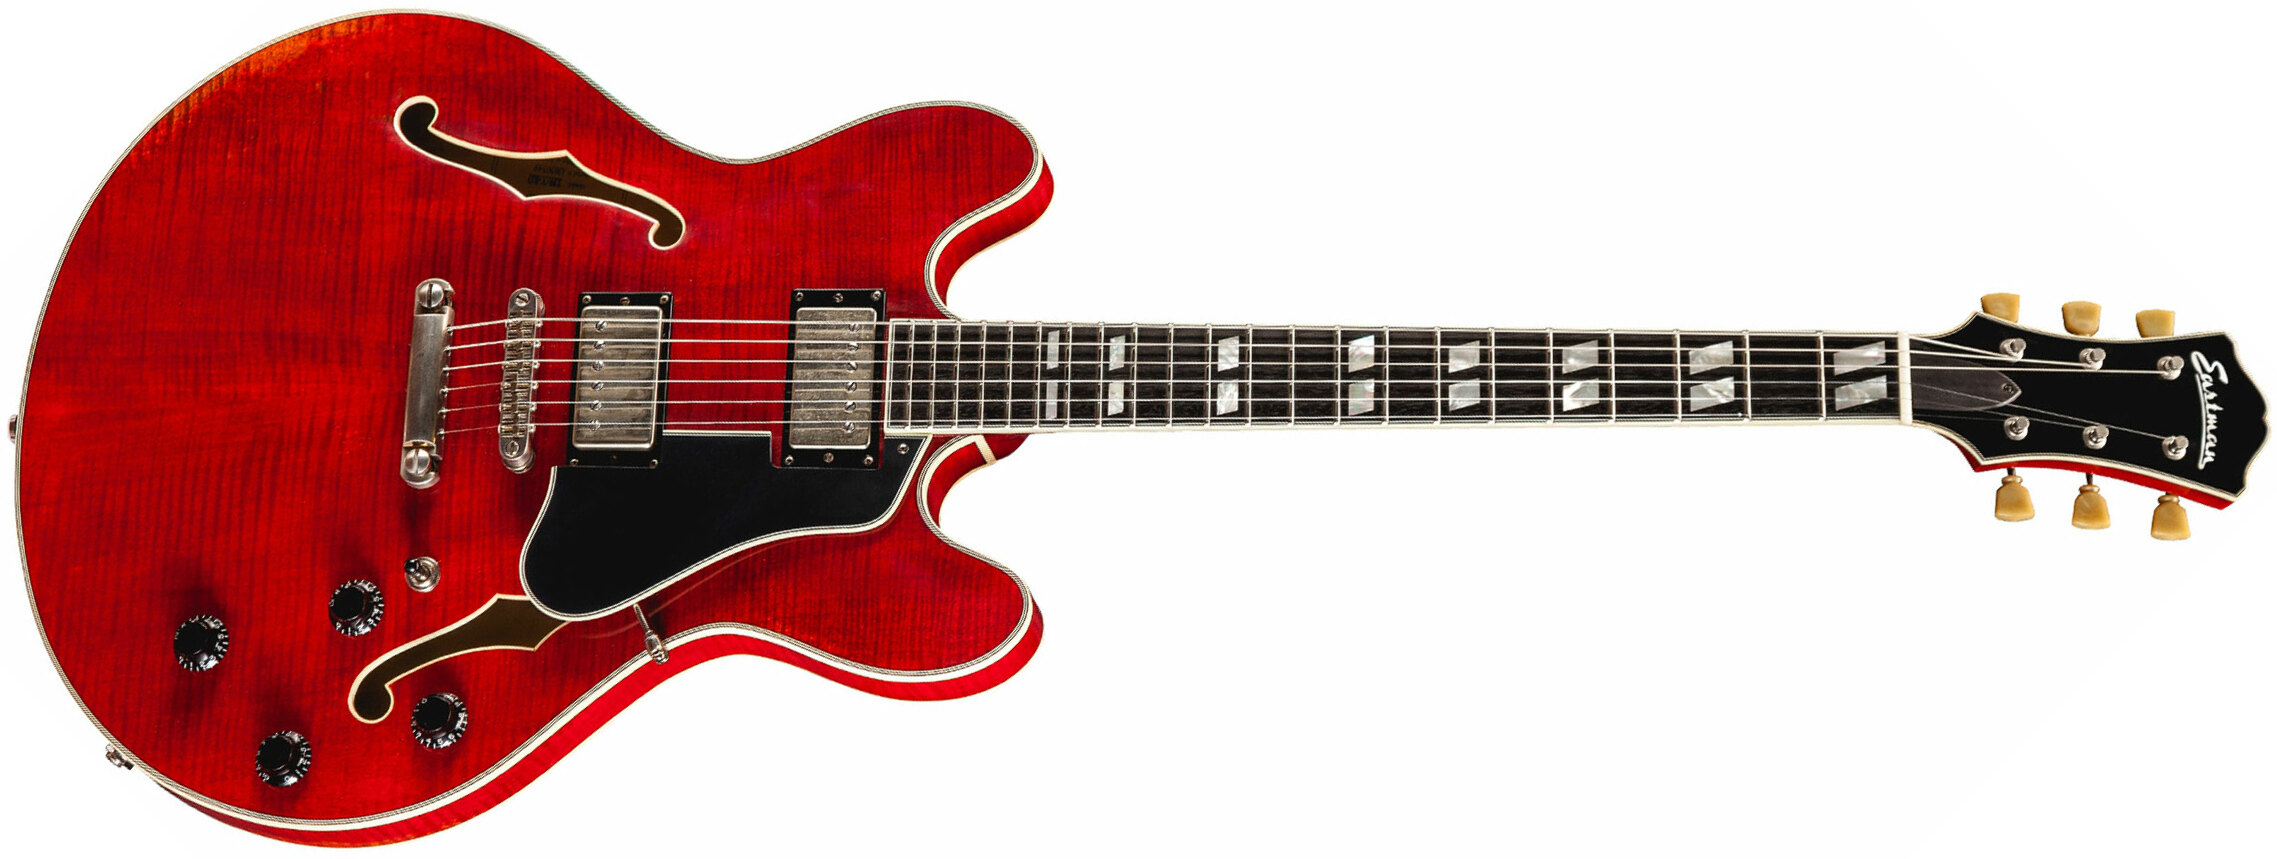 Eastman T59v Thinline Laminate Hh Lollar Ht Eb - Red - Semi-hollow electric guitar - Main picture